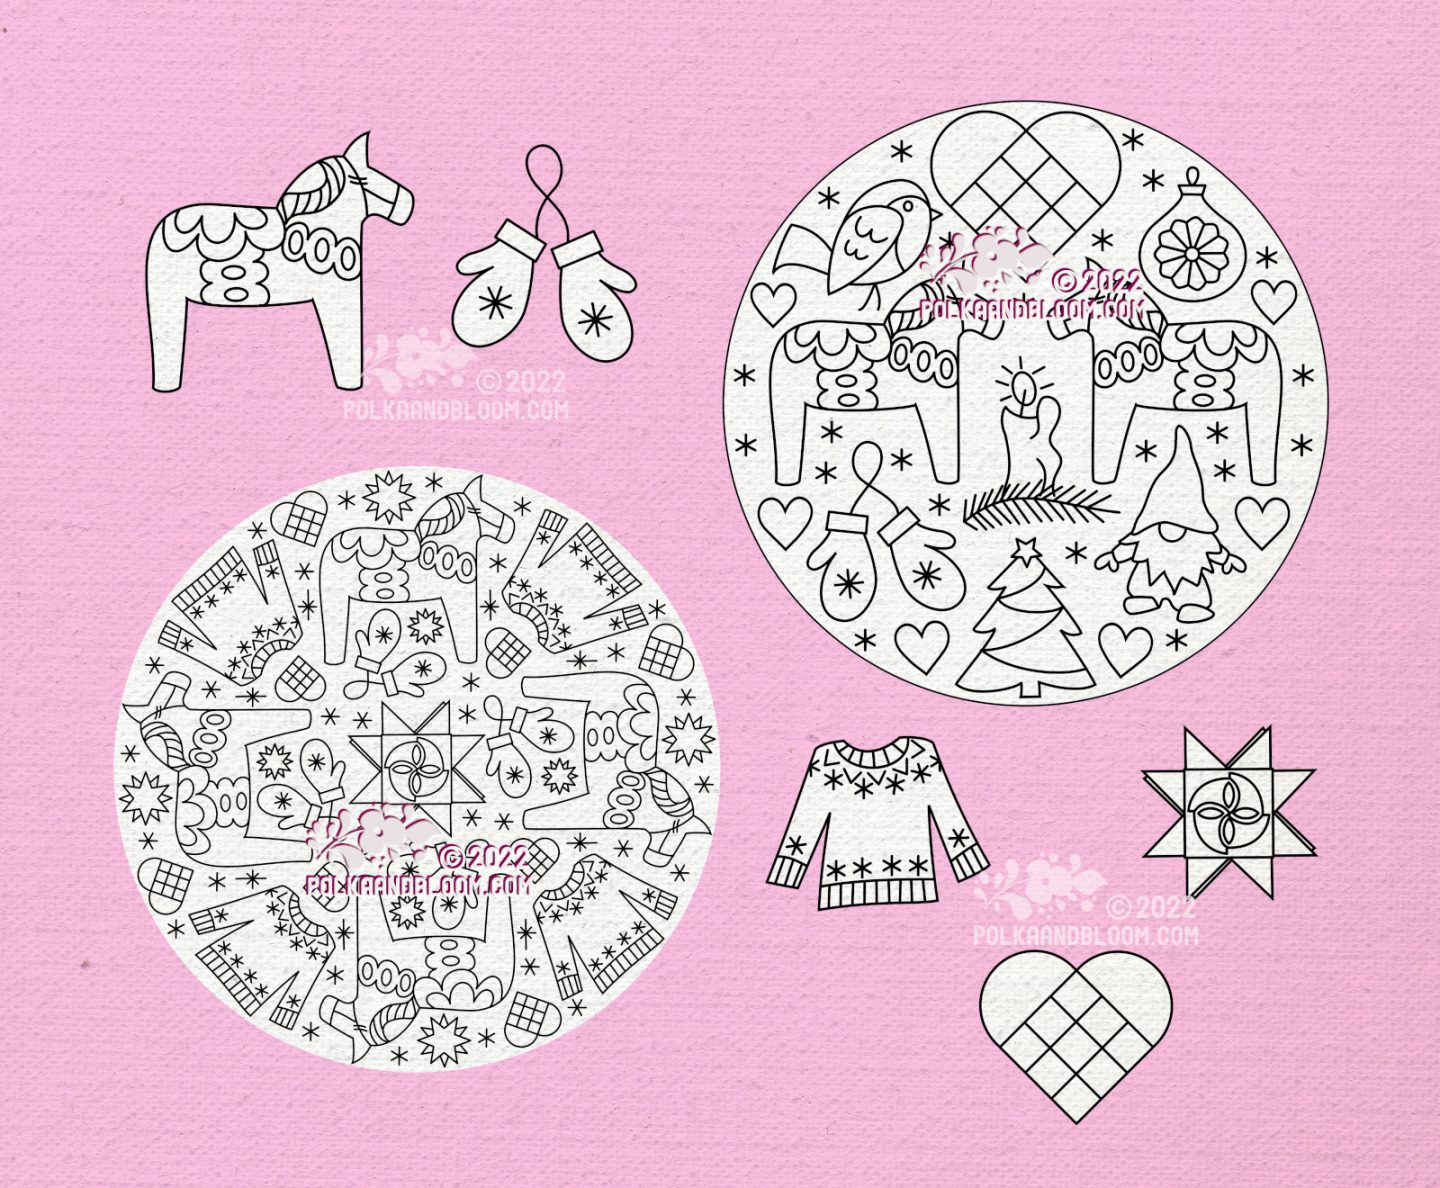 A graphic with Christmas motifs in black and white on a pink background.